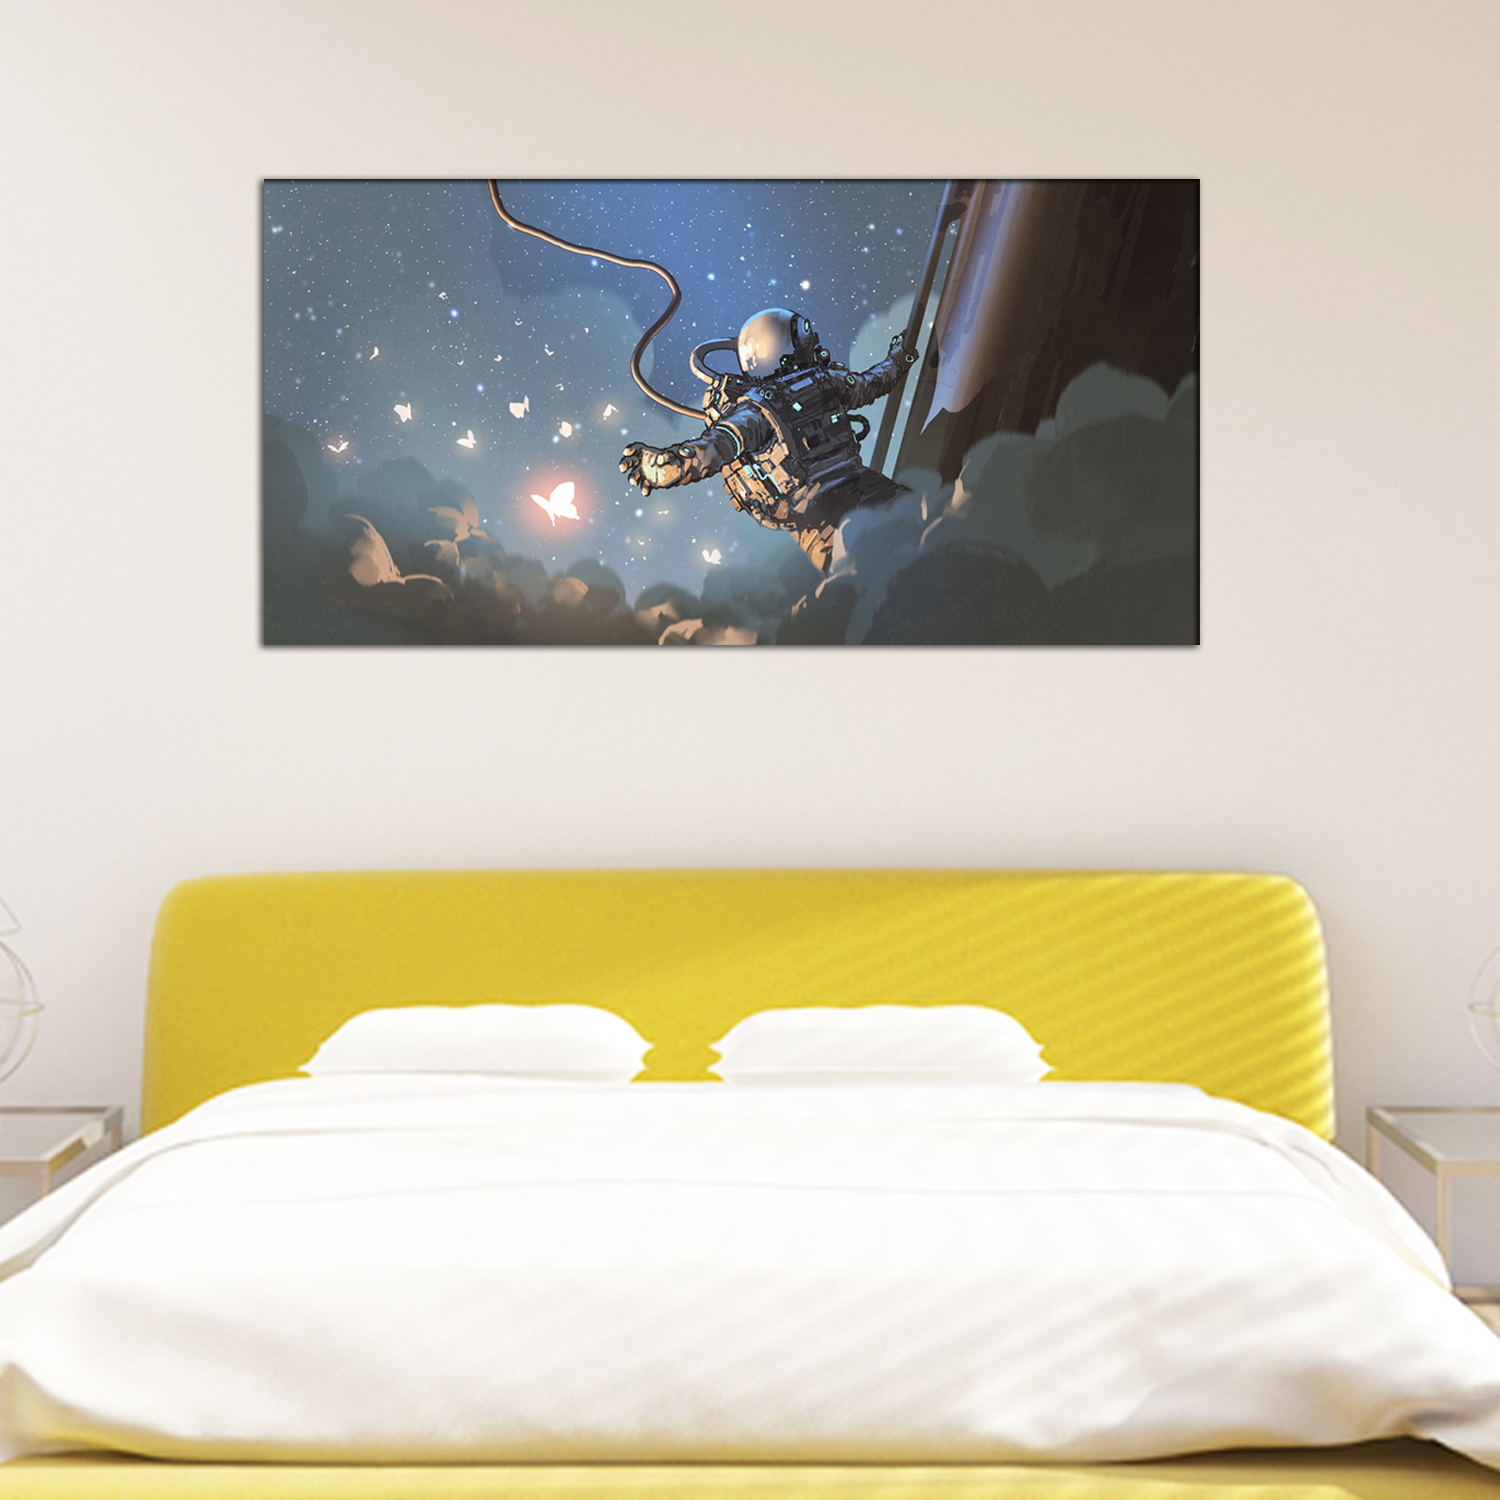 The Astronaut Catch The Butterfly Canvas Print Wall Painting